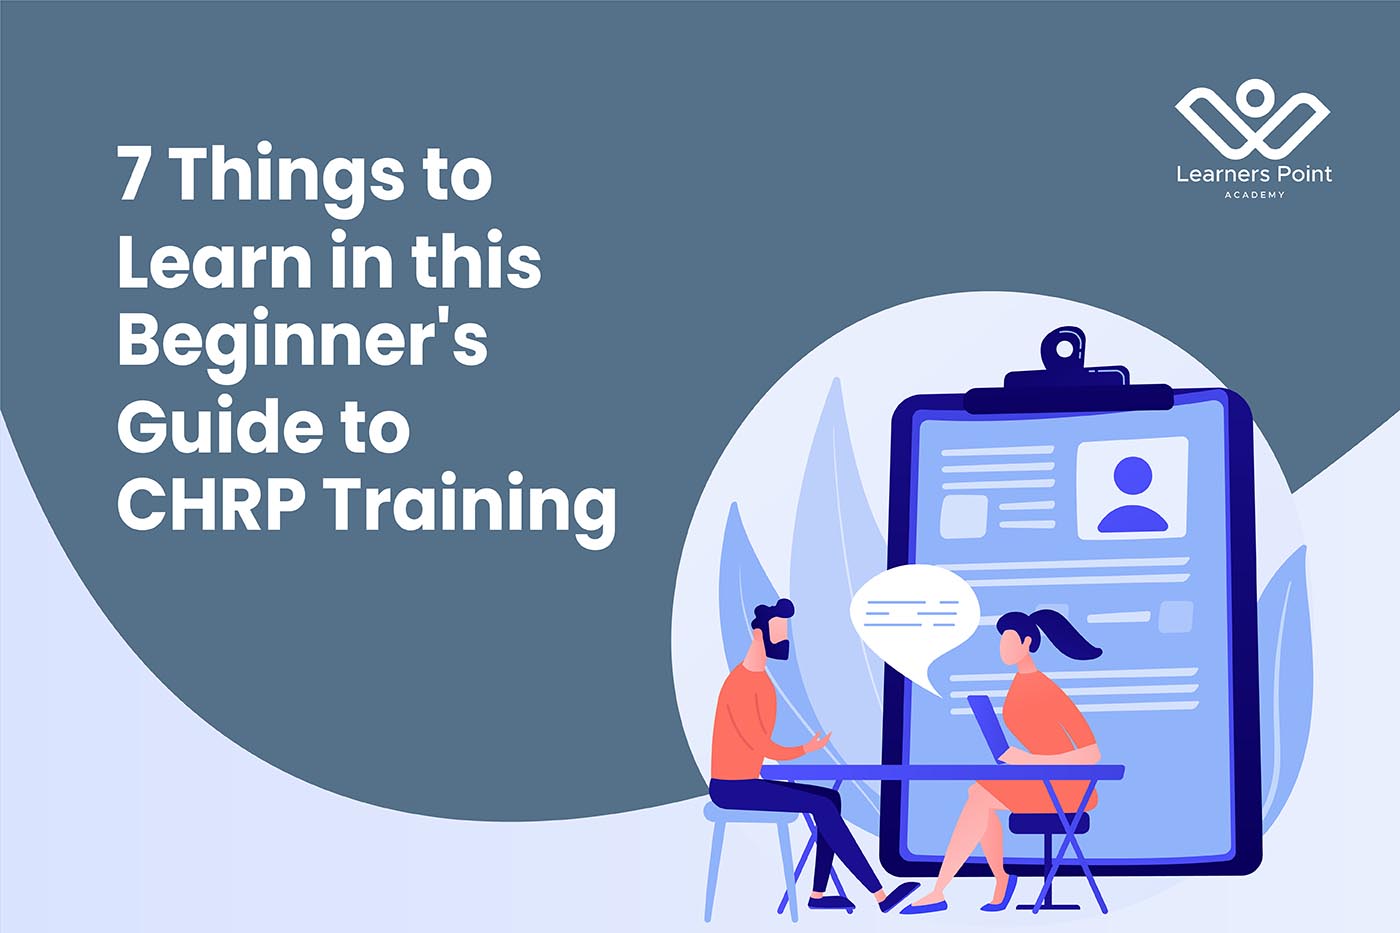 7 Things to Learn in this Beginner's Guide to CHRP Training